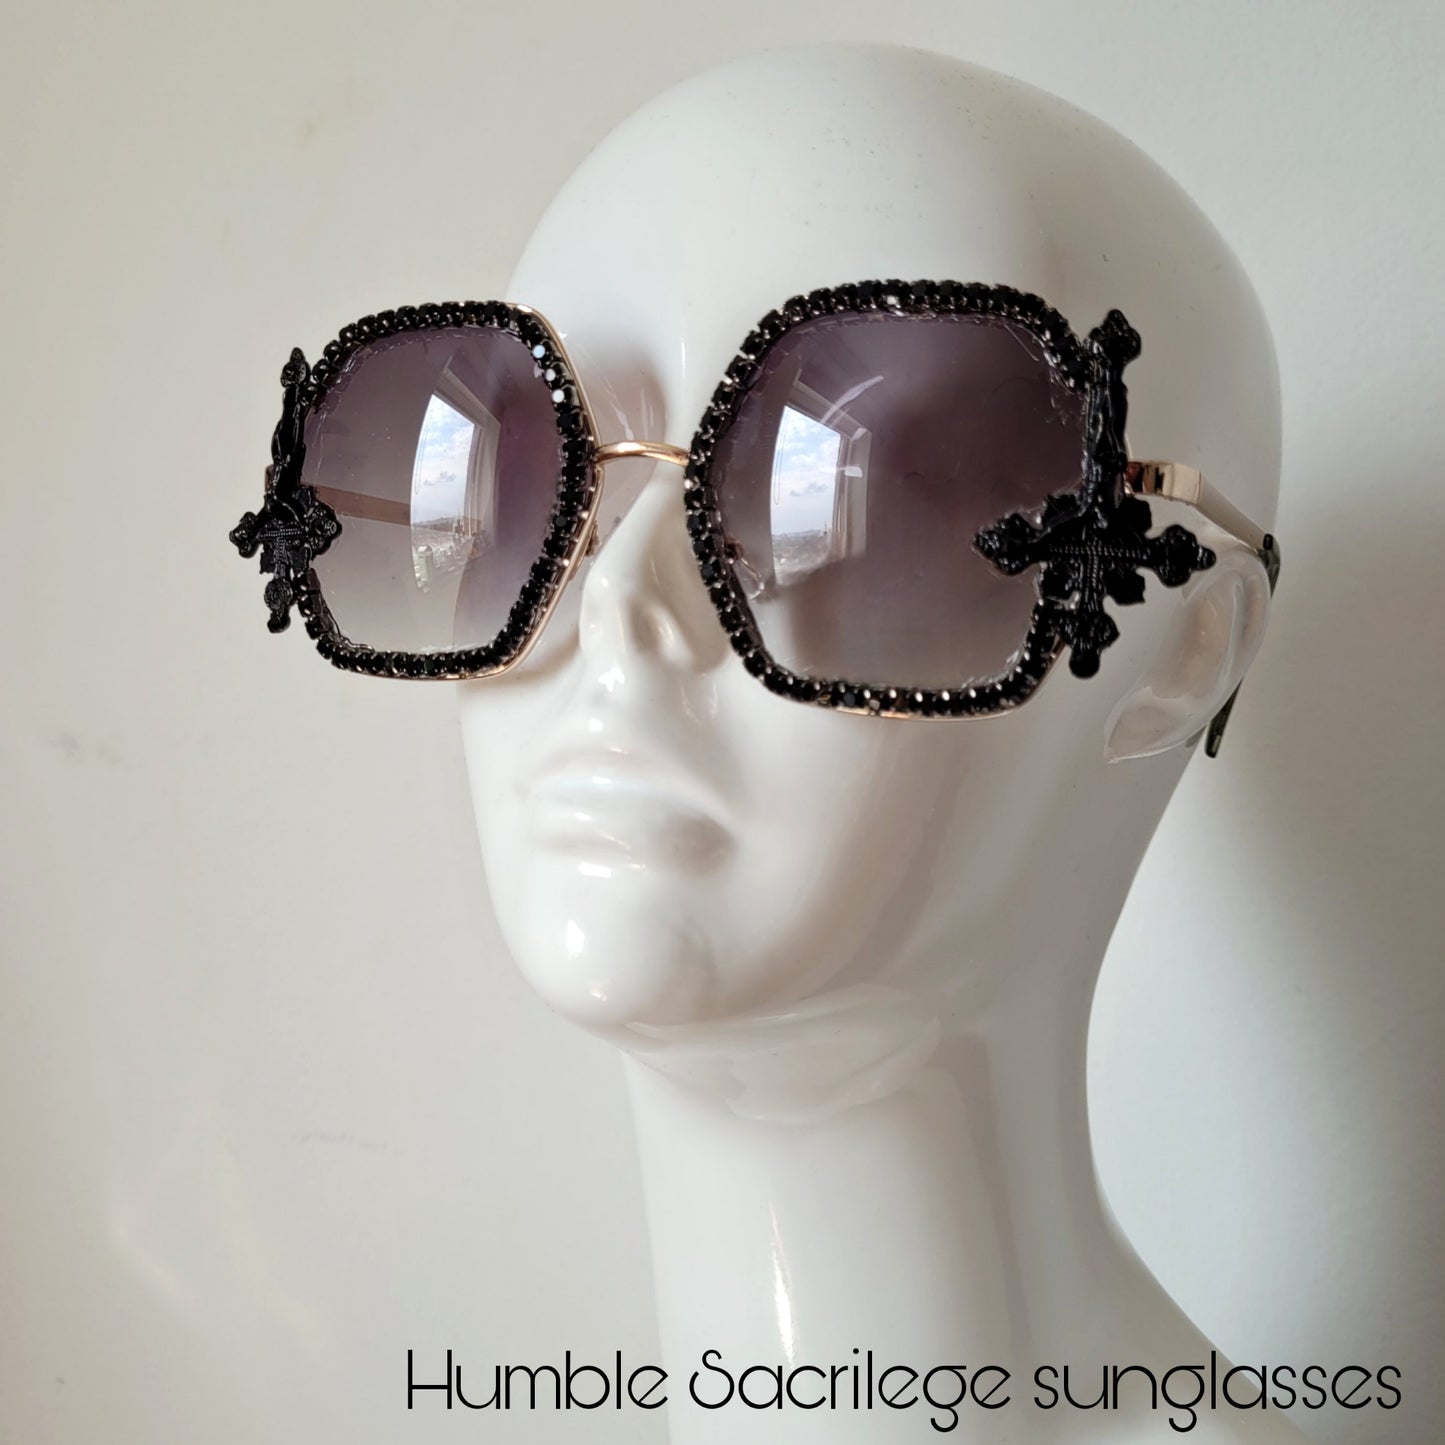 Sacrilegious Collection: The Humble Sacrilege sunglasses, limited made to ordee edition